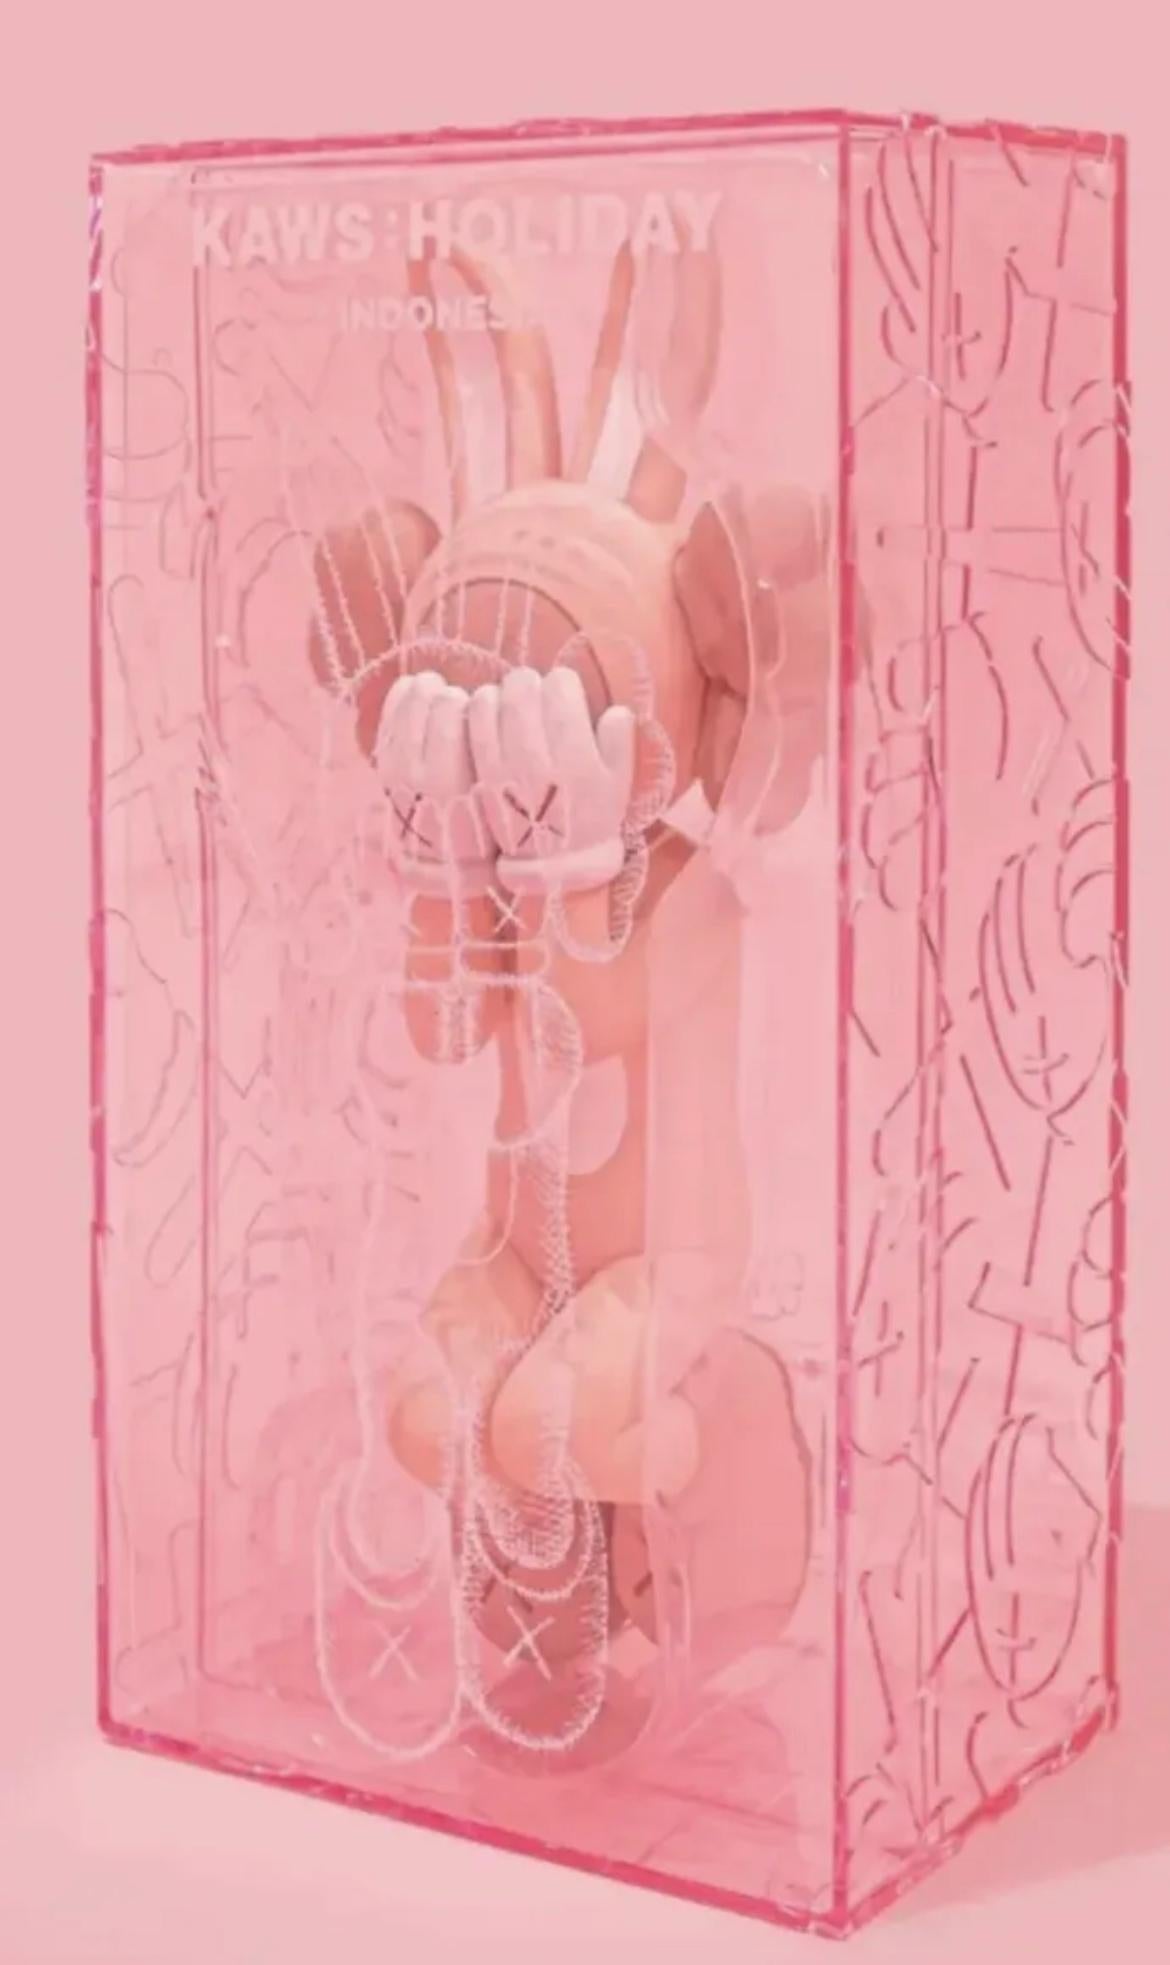 KAWS Holiday Pink Bunny Rabbit Comes With NFC Chip Contemporary Street Art 